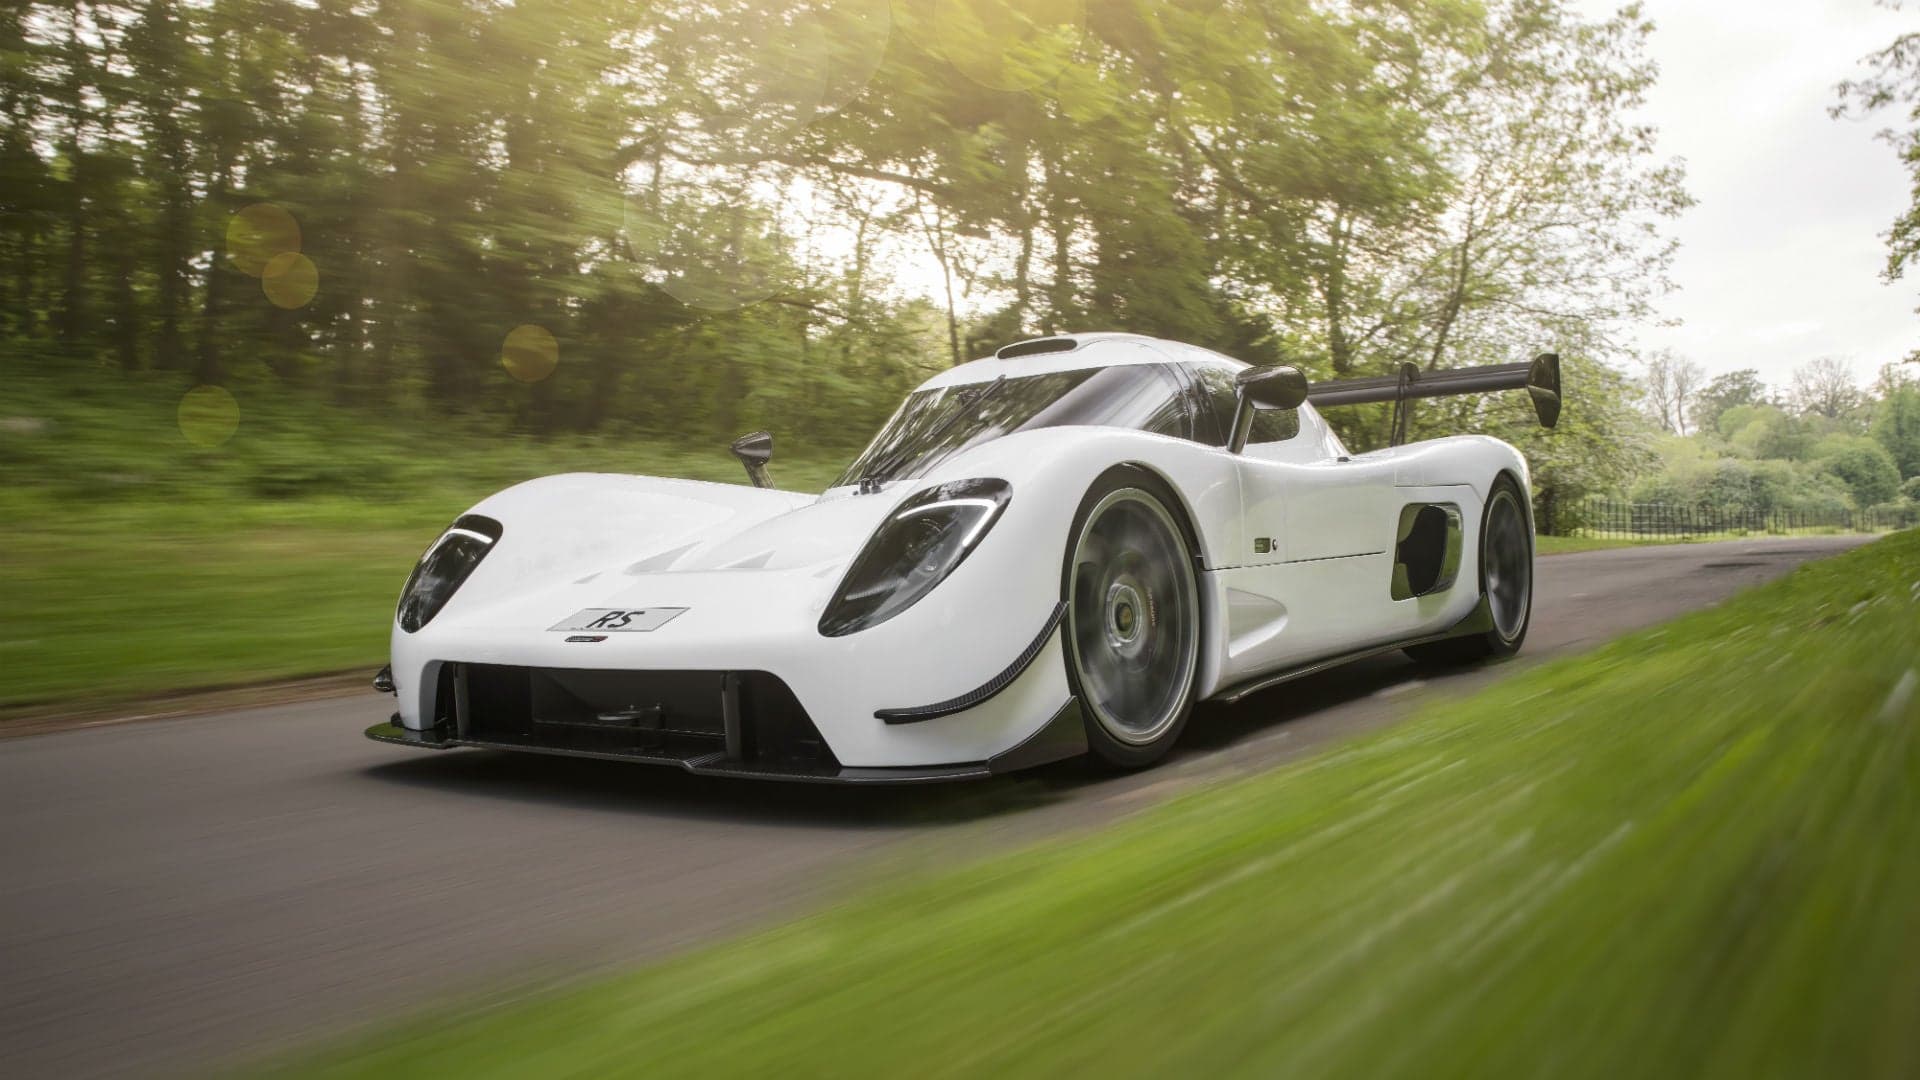 New Ultima RS Supercar Is a 1,200-HP, Stick-Shift Track Weapon That’s Also Road-Legal